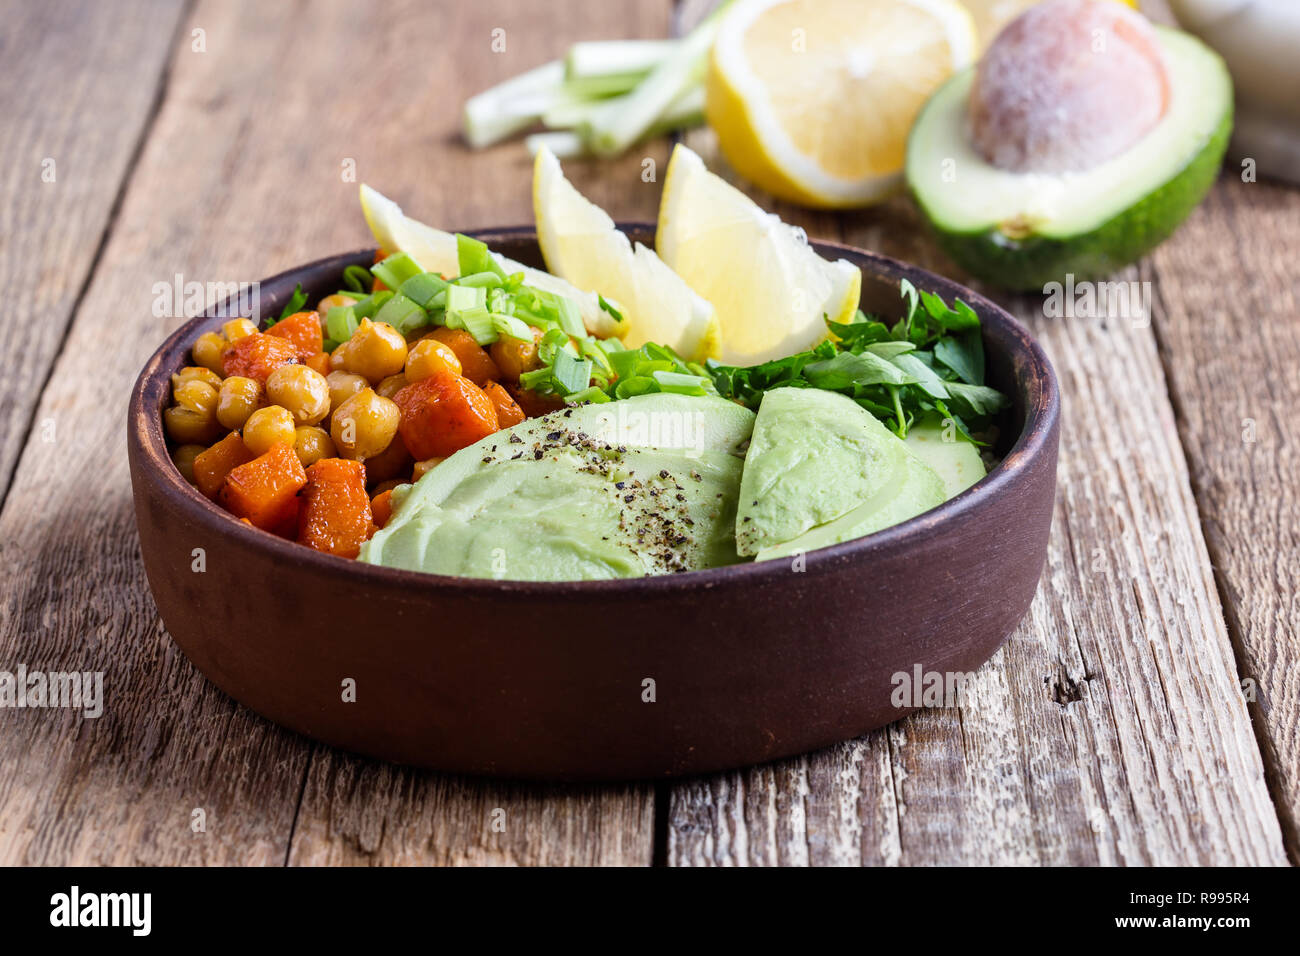 Healthy chickpea avocado quinoa bowl on rustic wooden table, plant based food, selective focus Stock Photo